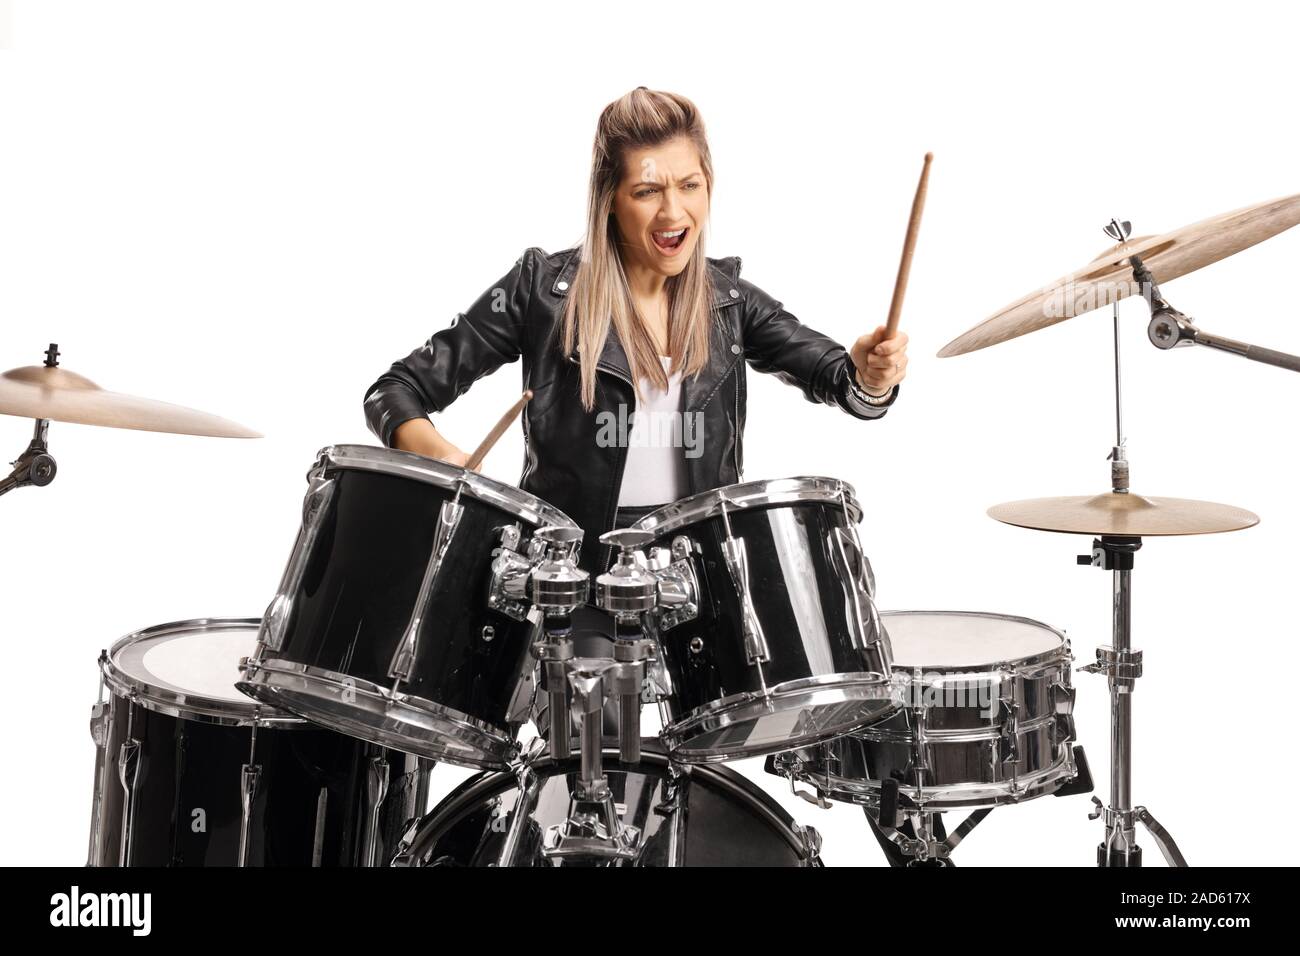 Female drummer playing on a set of drums isolated on white background Stock Photo